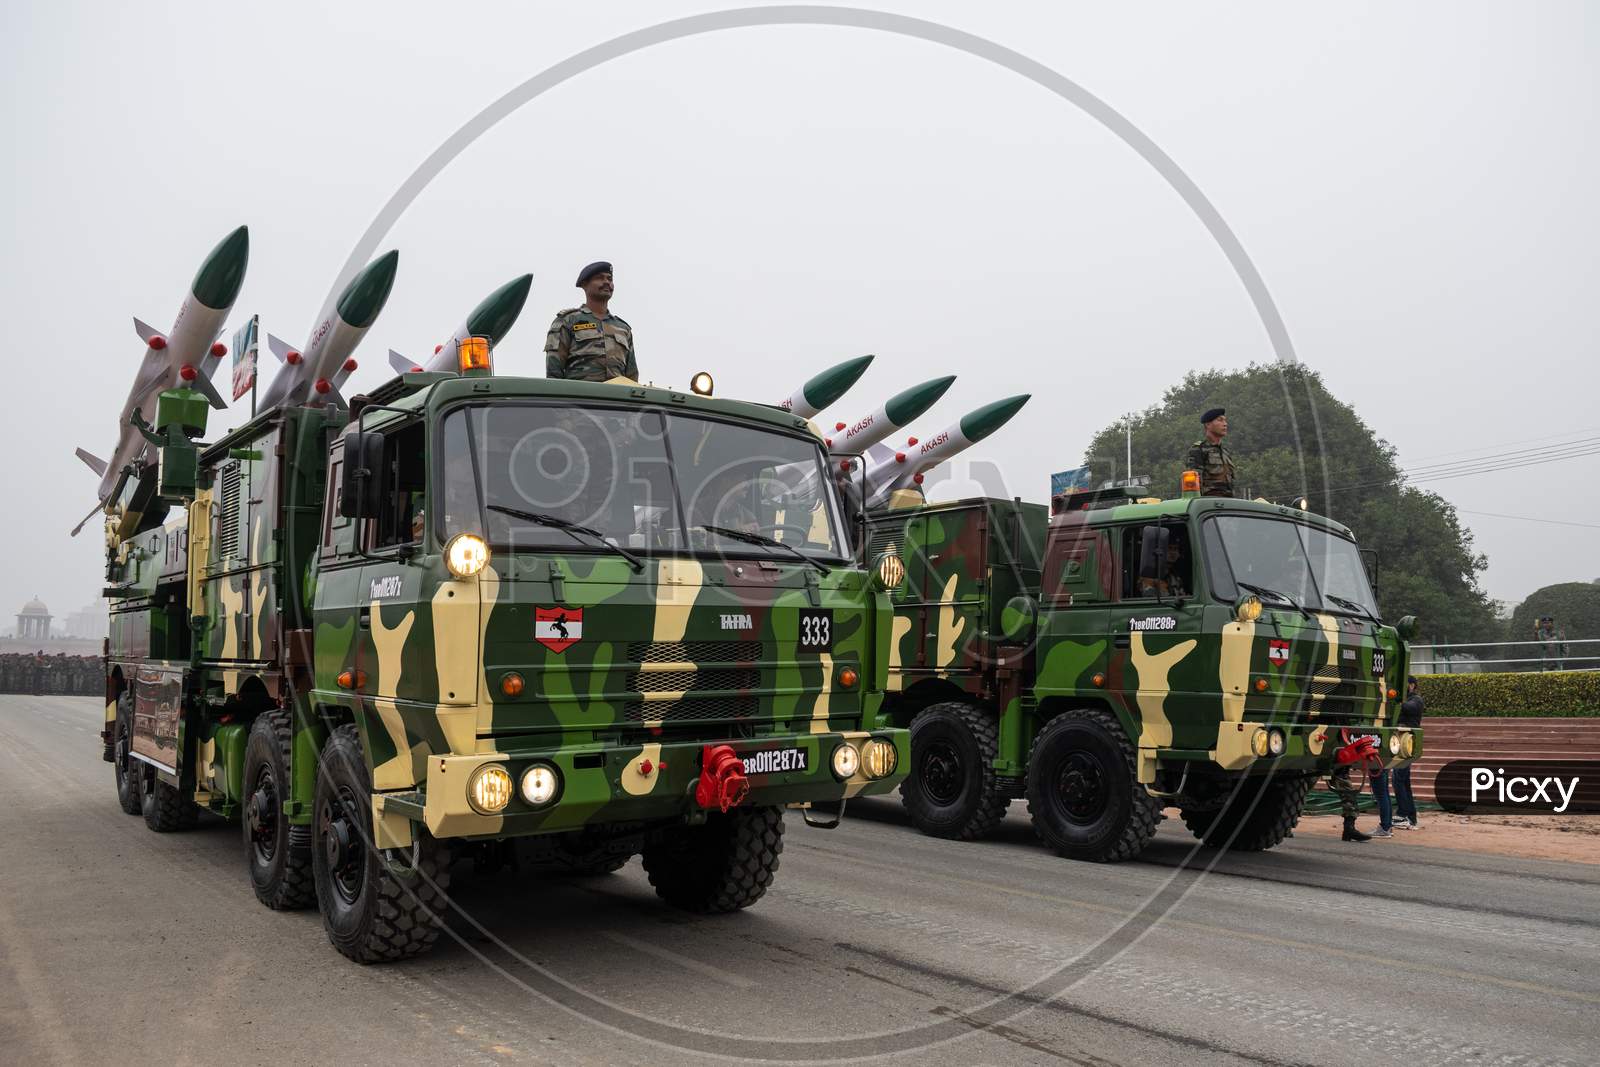 Indian Army Akash Missile Systems Practicing for Republic Day Parade, Delhi